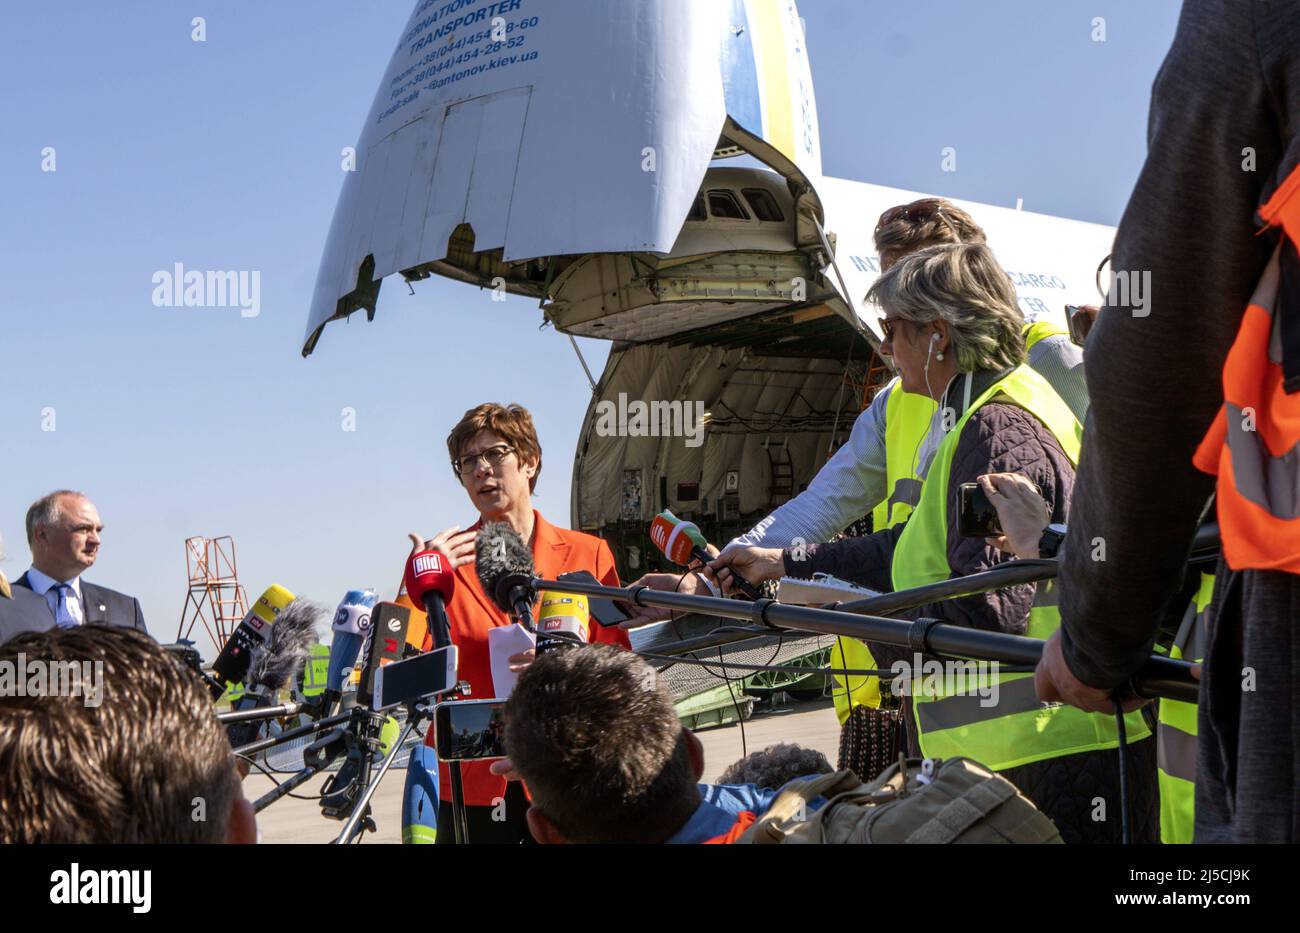 Germany, Berlin, 27.04.2020. Official assistance of the Bundeswehr in the Corona crisis. Bundeswehr transports protective masks from China to Leipzig with Antonov AN-225. Defense Minister Annegret Kramp-Karrenbauer welcomes airlift at Leipzig Airport, April 27, 2020. Center of photo: press statement by Annegret Kramp-Karrenbauer (CDU), Federal Minister of Defense. In the background: Antonov AN-225. [automated translation] Stock Photo